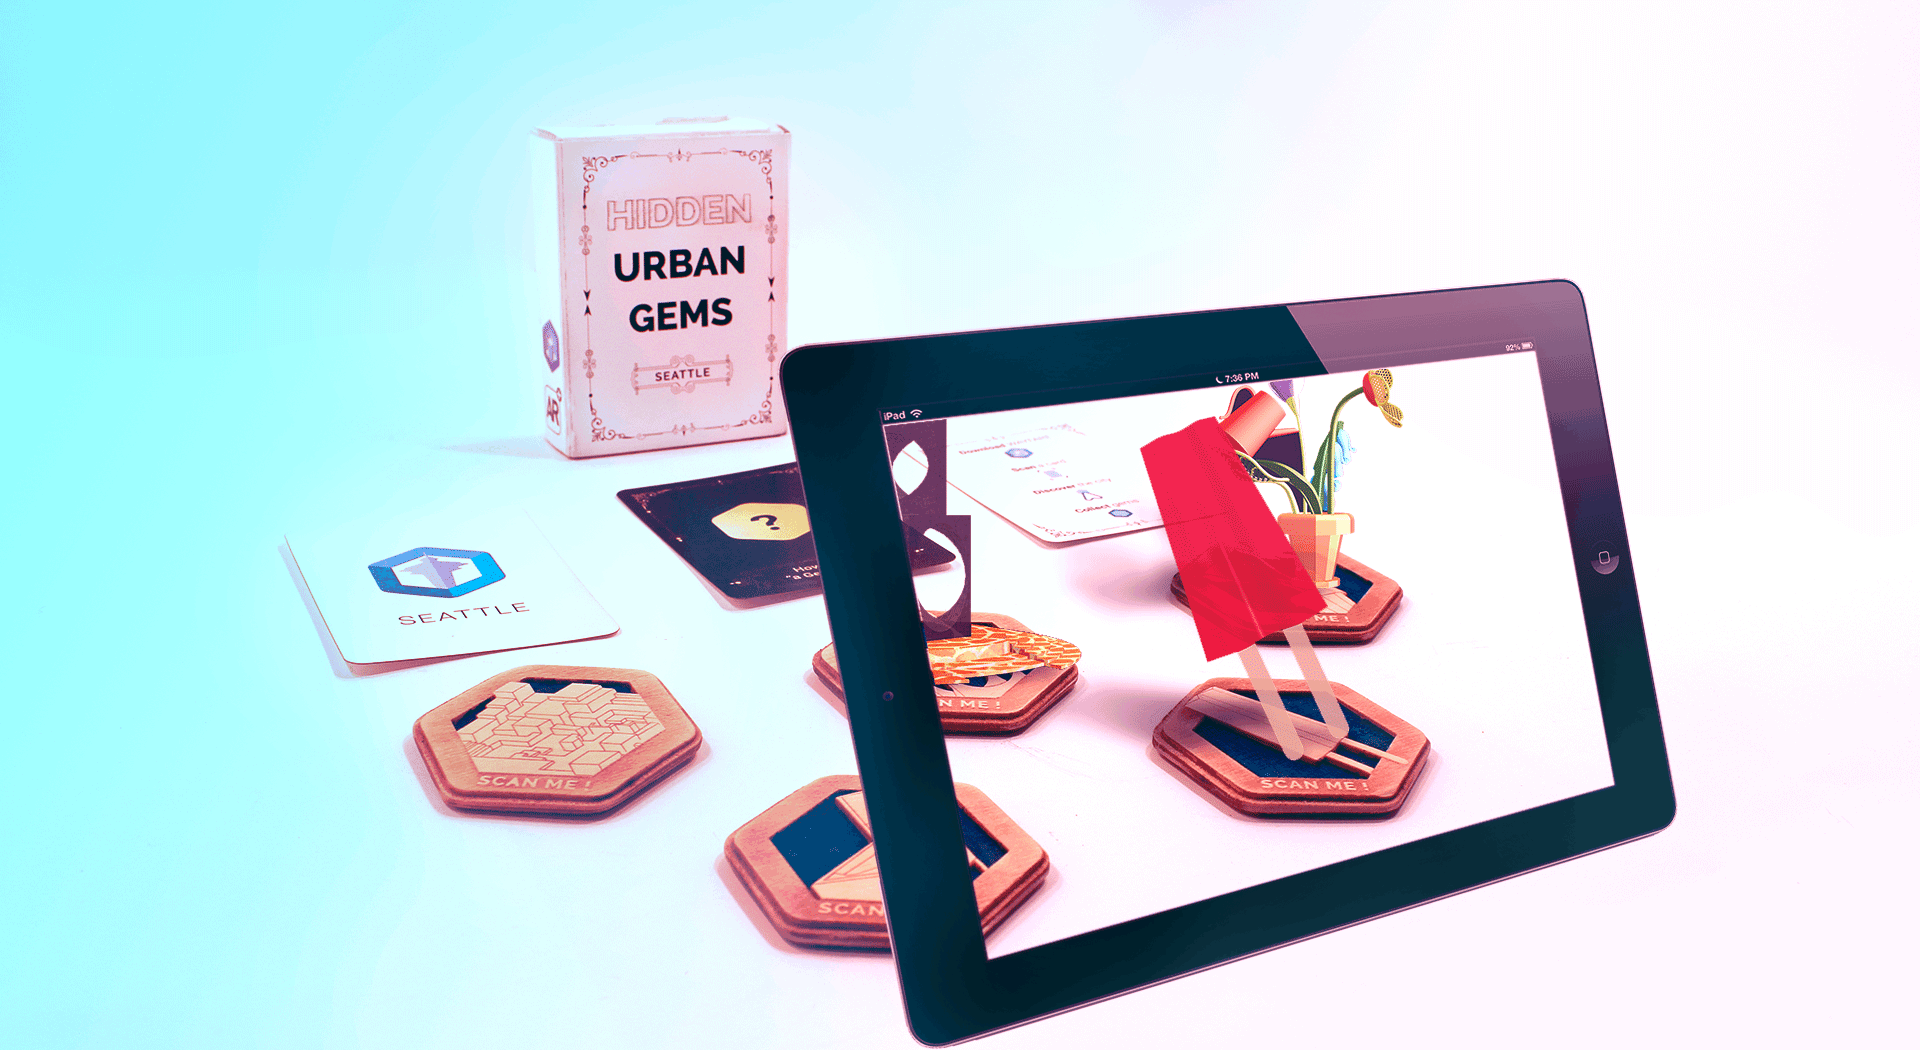 Hidden Urban Gems Deck & Augmented Reality (AR) Tokens by Sam To